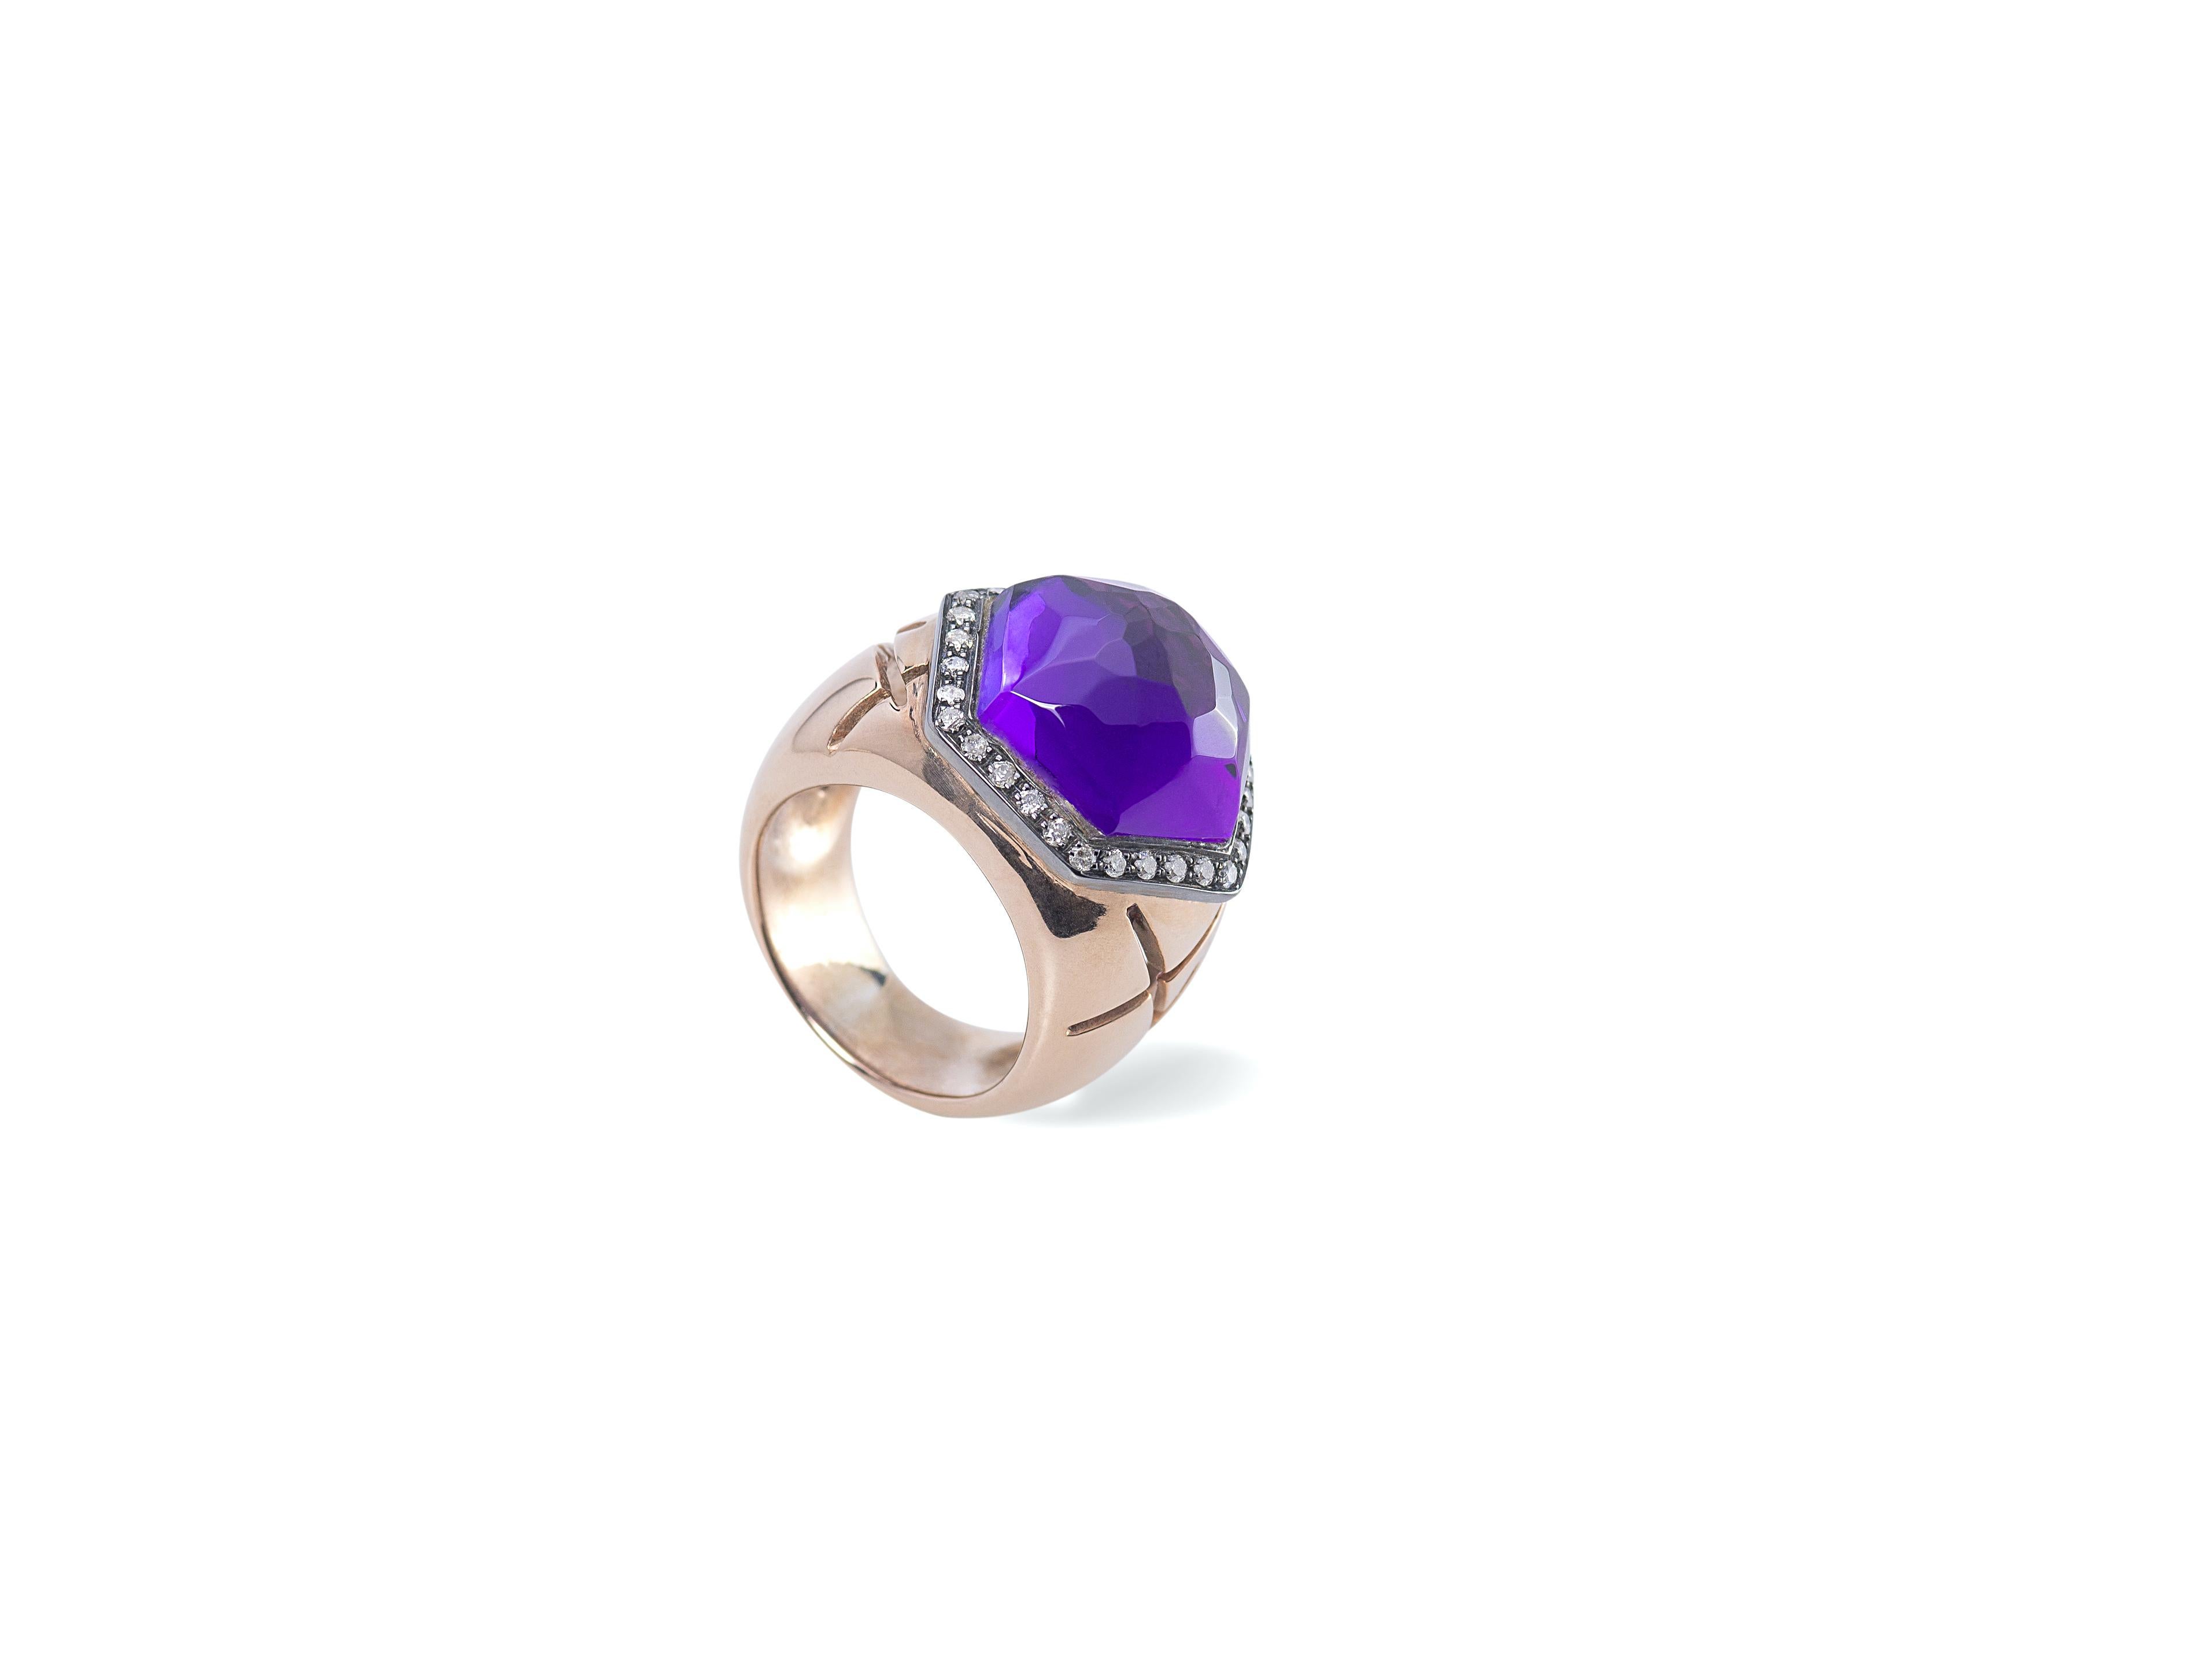 Rossella Ugolini Hexagonal Amethyst Cocktail Ring 18K Gold and Diamonds For Sale 3